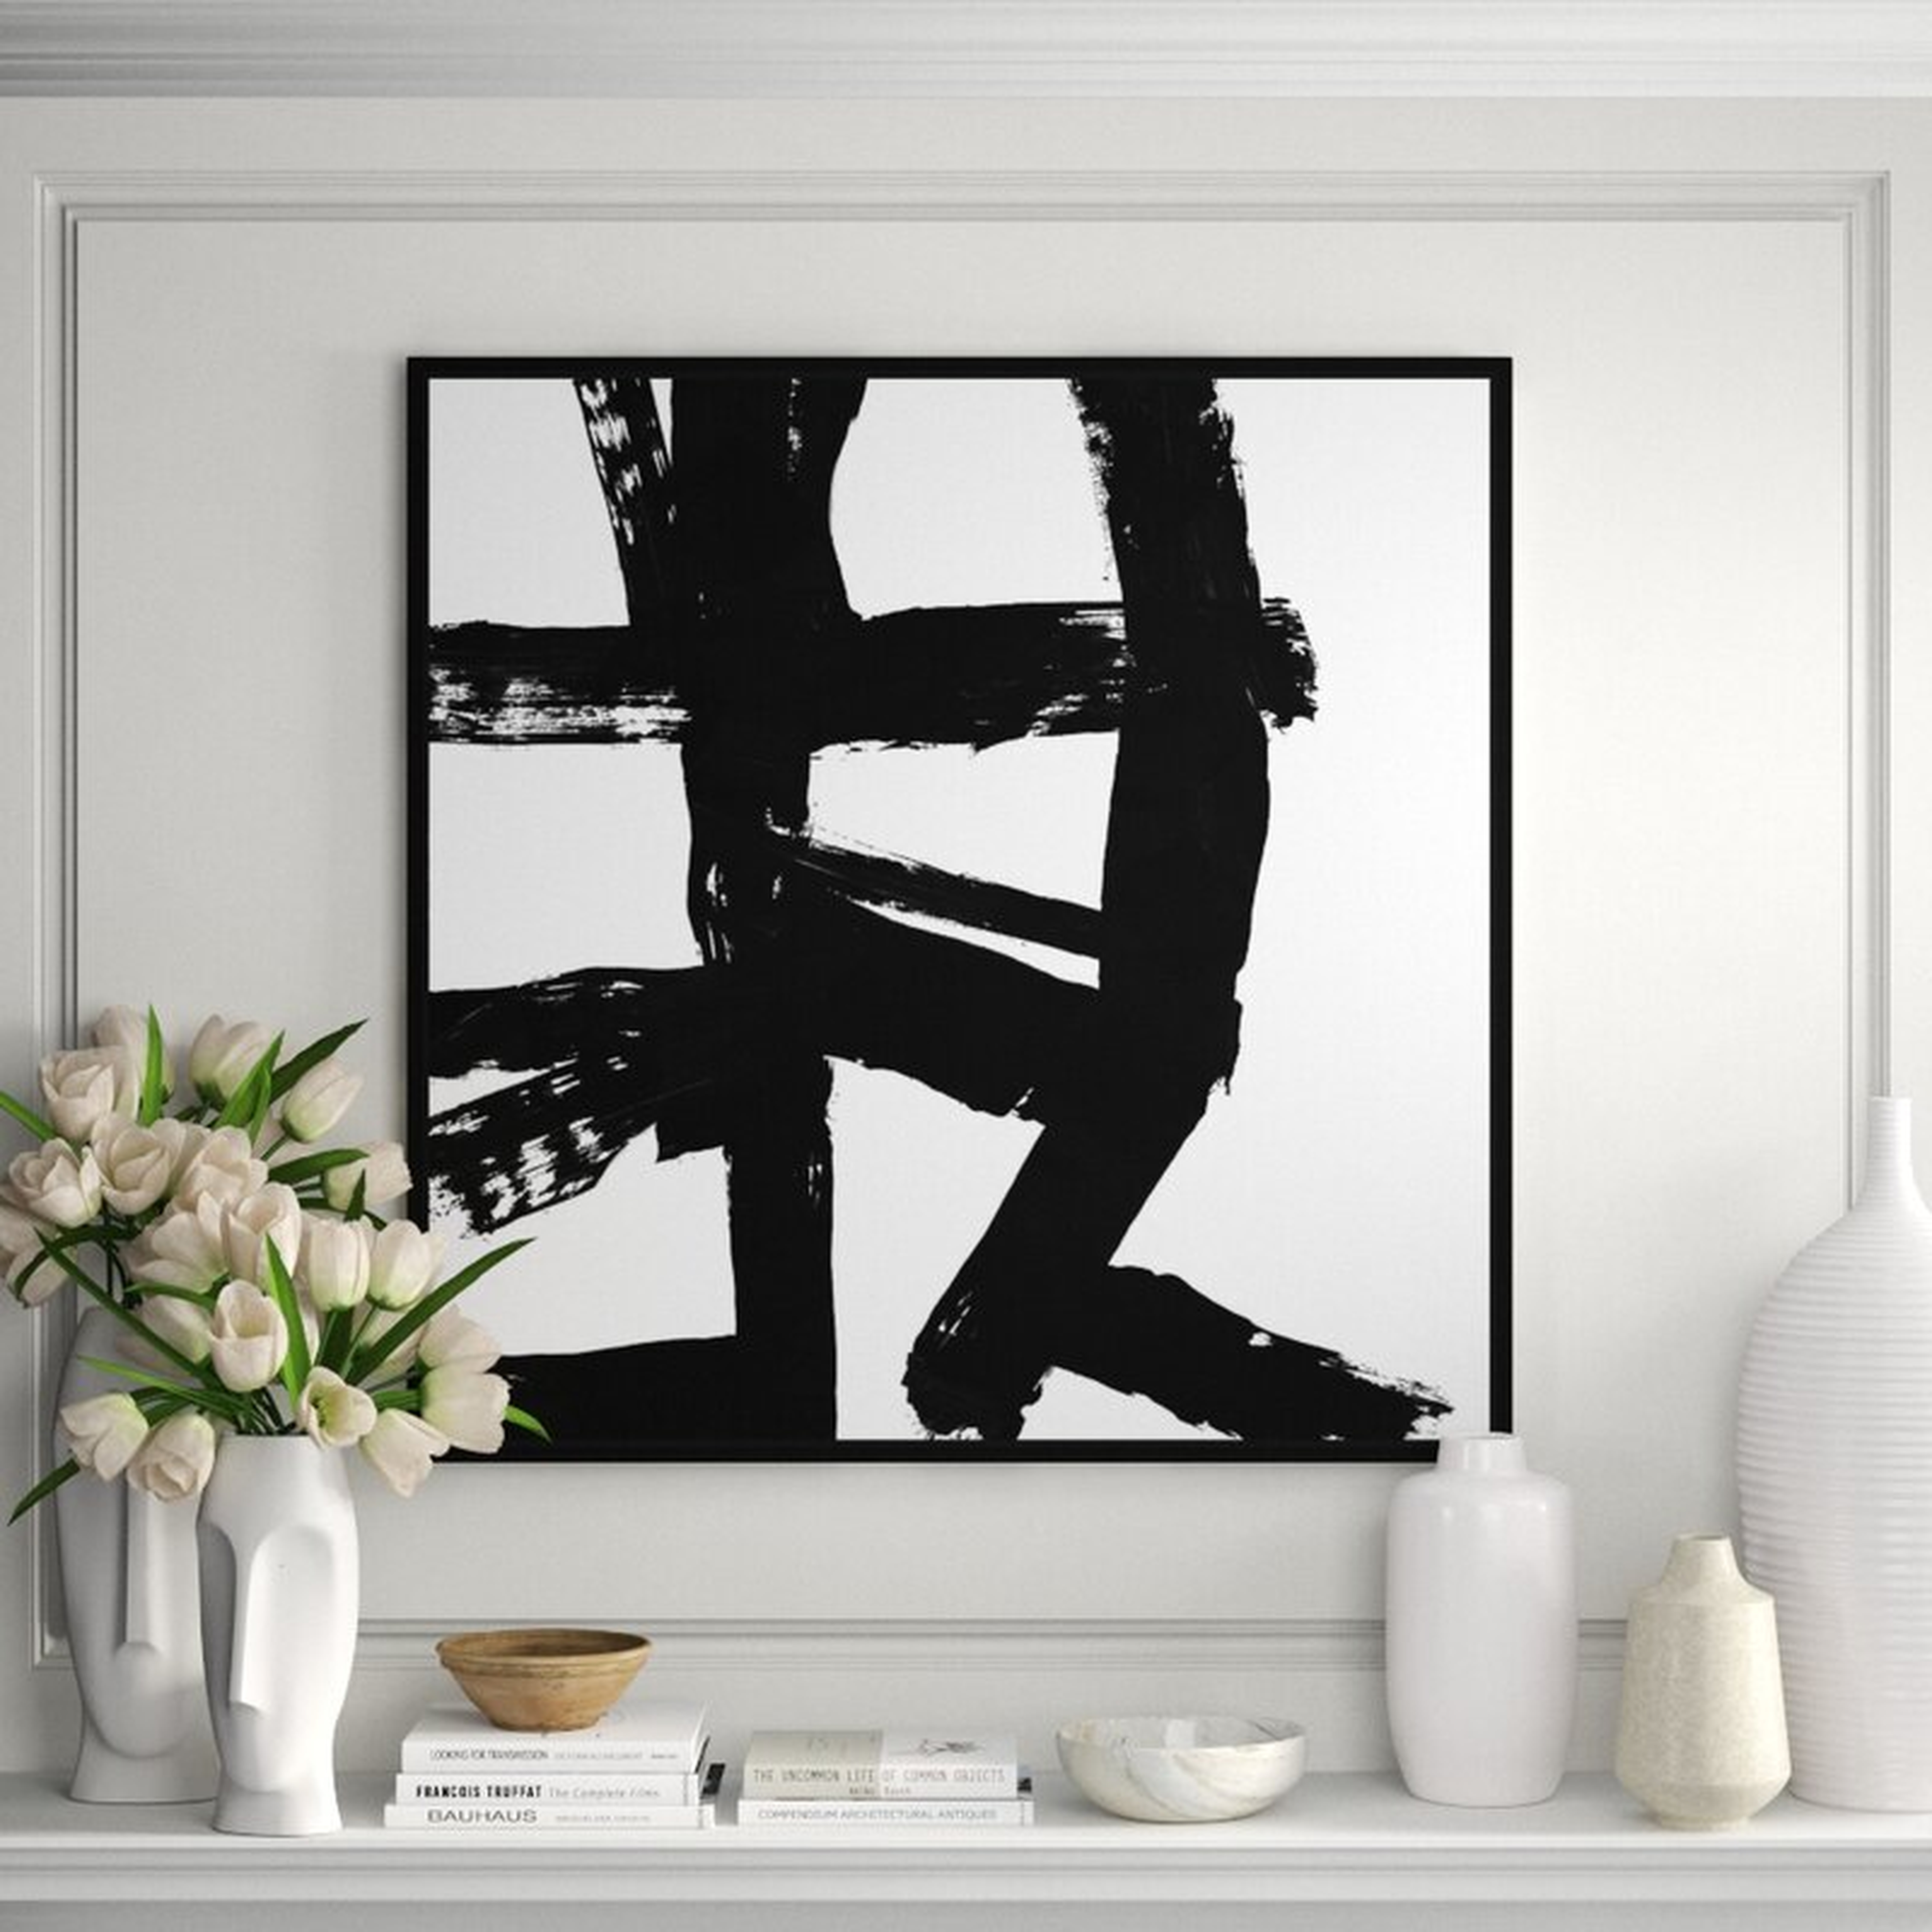 JBass Grand Gallery Collection 'White Vs Black' Framed Graphic Art Print on Wrapped Canvas Size: 41.75" H x 41.75" W x 1.5" D - Perigold